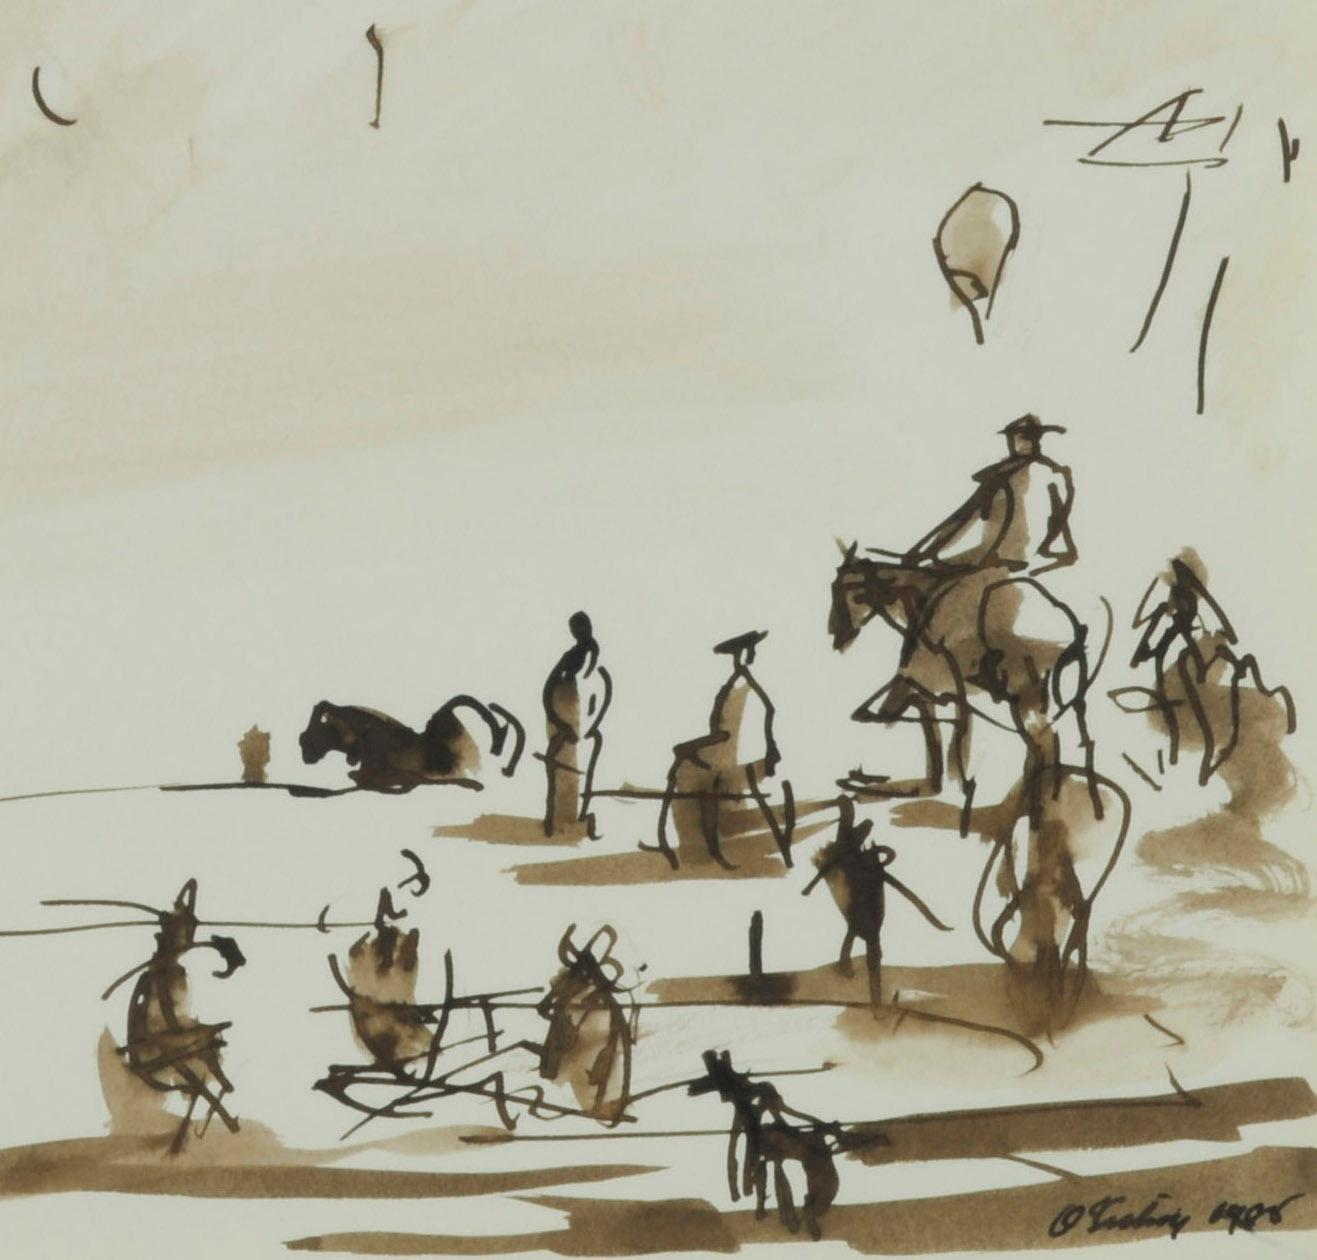 Untitled (Hot Air Baloon Ascent and Spectators) - American Modern Art by Joseph O'Sickey